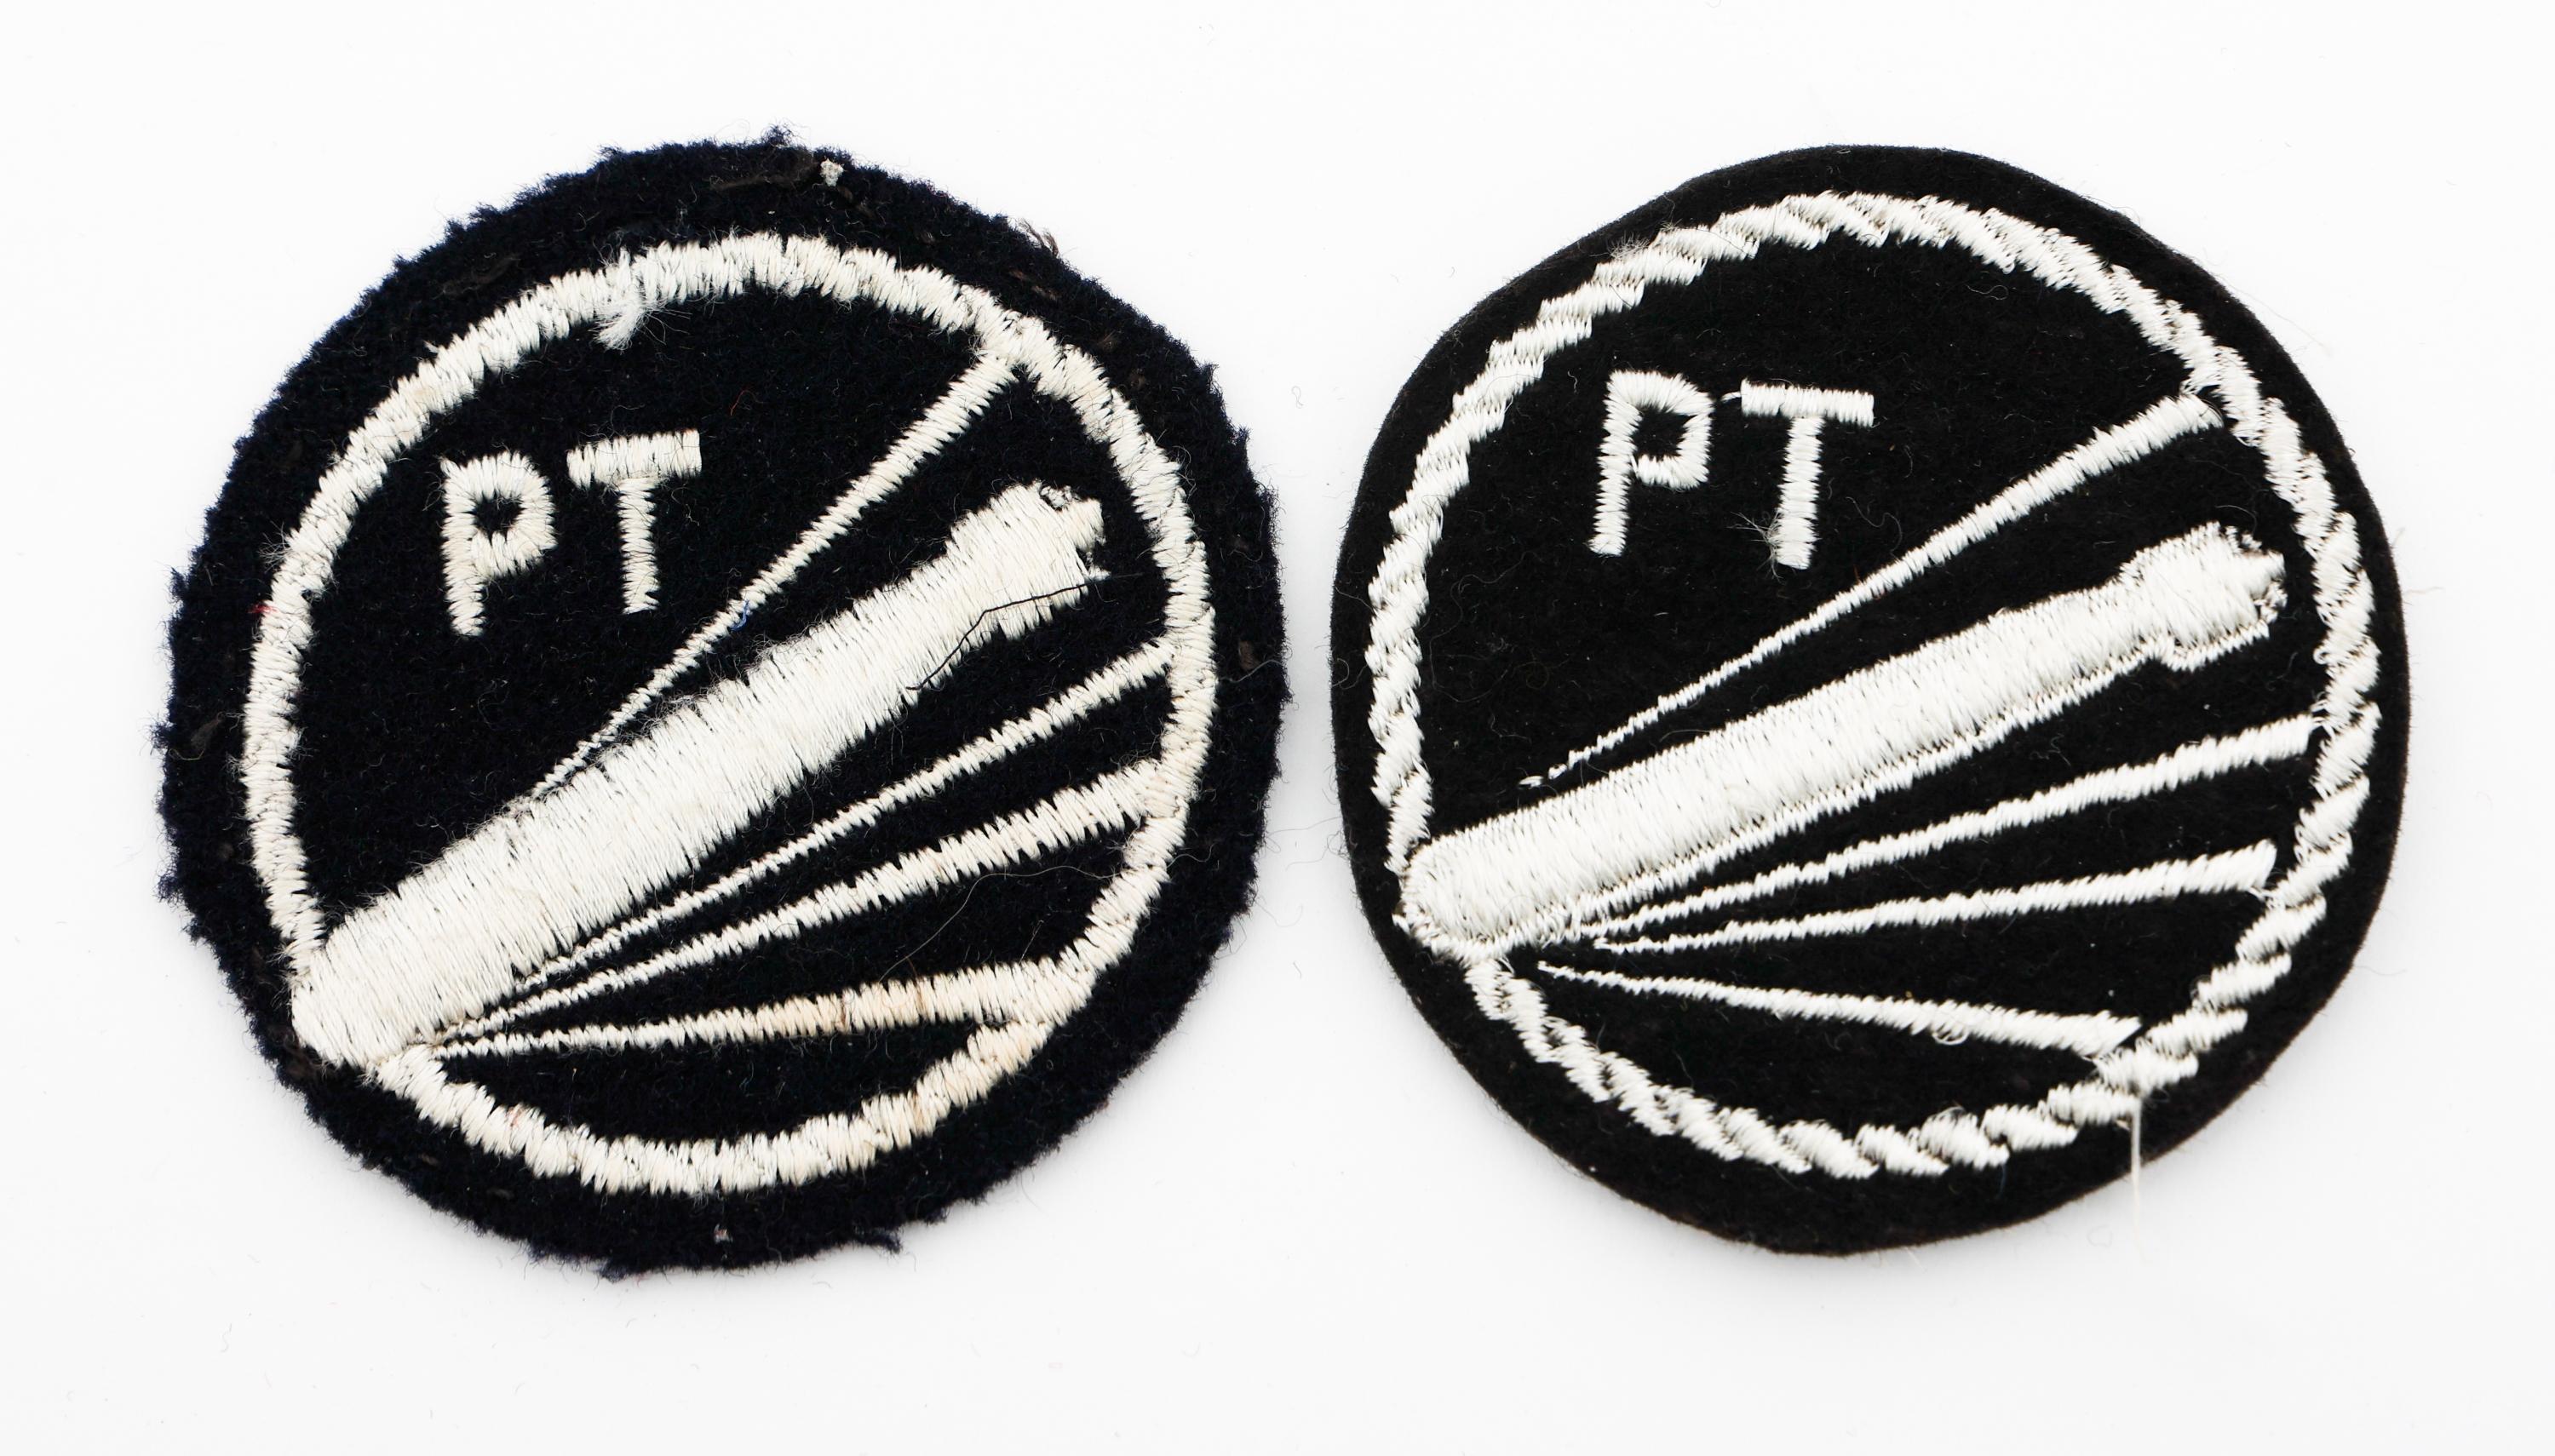 WWII US NAVY TORPEDO PATROL BOAT PATCHES